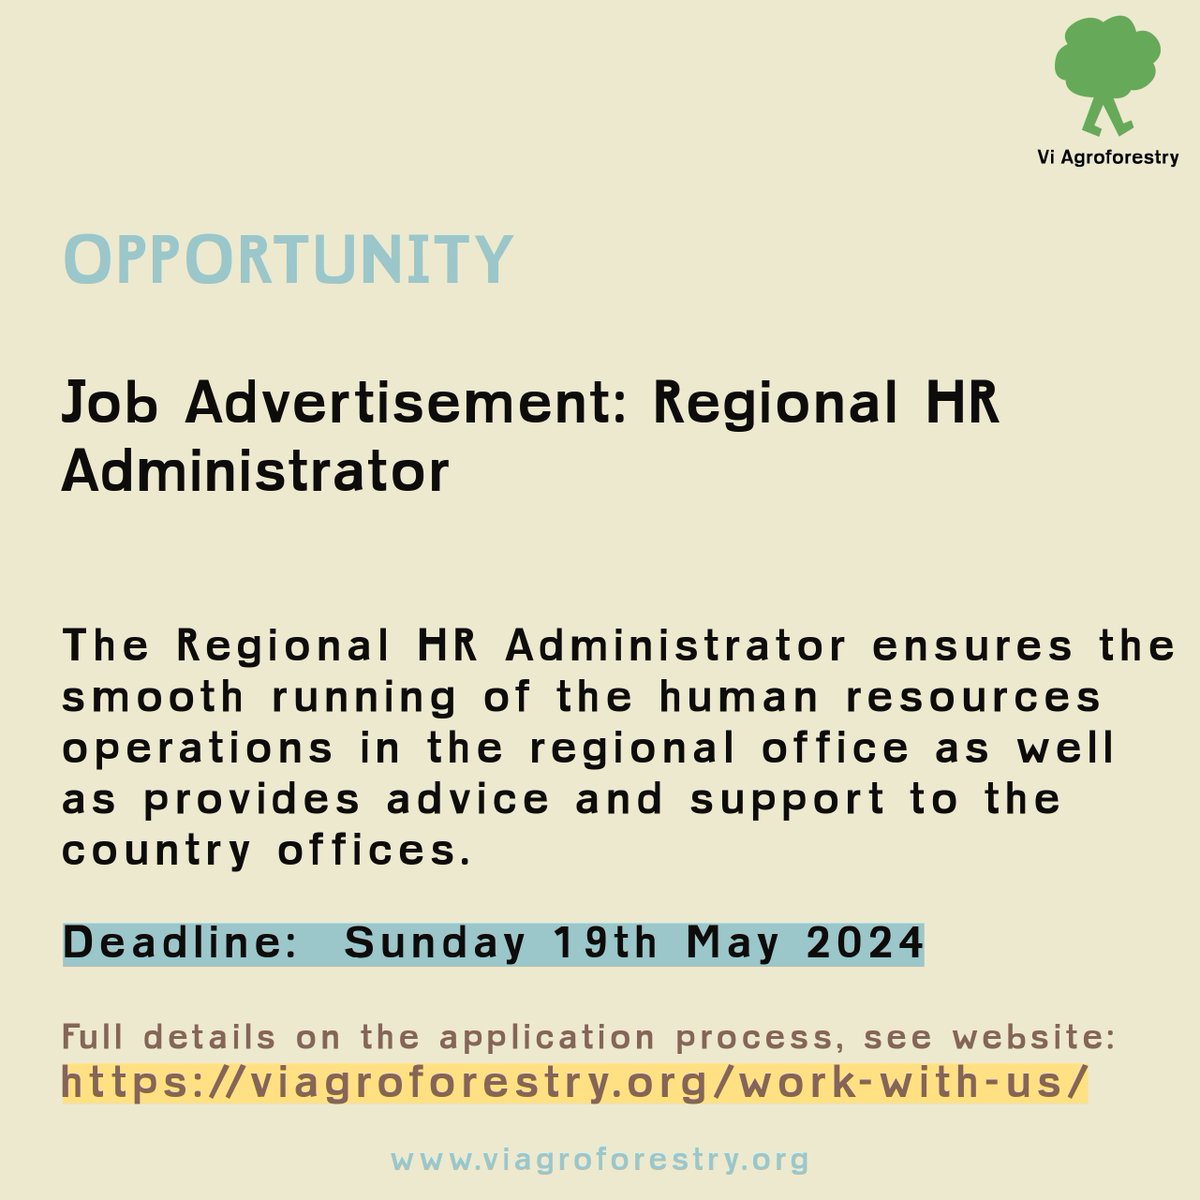 📷 Exciting Opportunity Alert! 📷 Join our team as a Regional HR Administrator! 📷 For full application details, visit: viagroforestry.org/work-with-us/ #JobOpportunity #ClimateChange #Agroforestry #Kenya #ViAgroforestry 📷